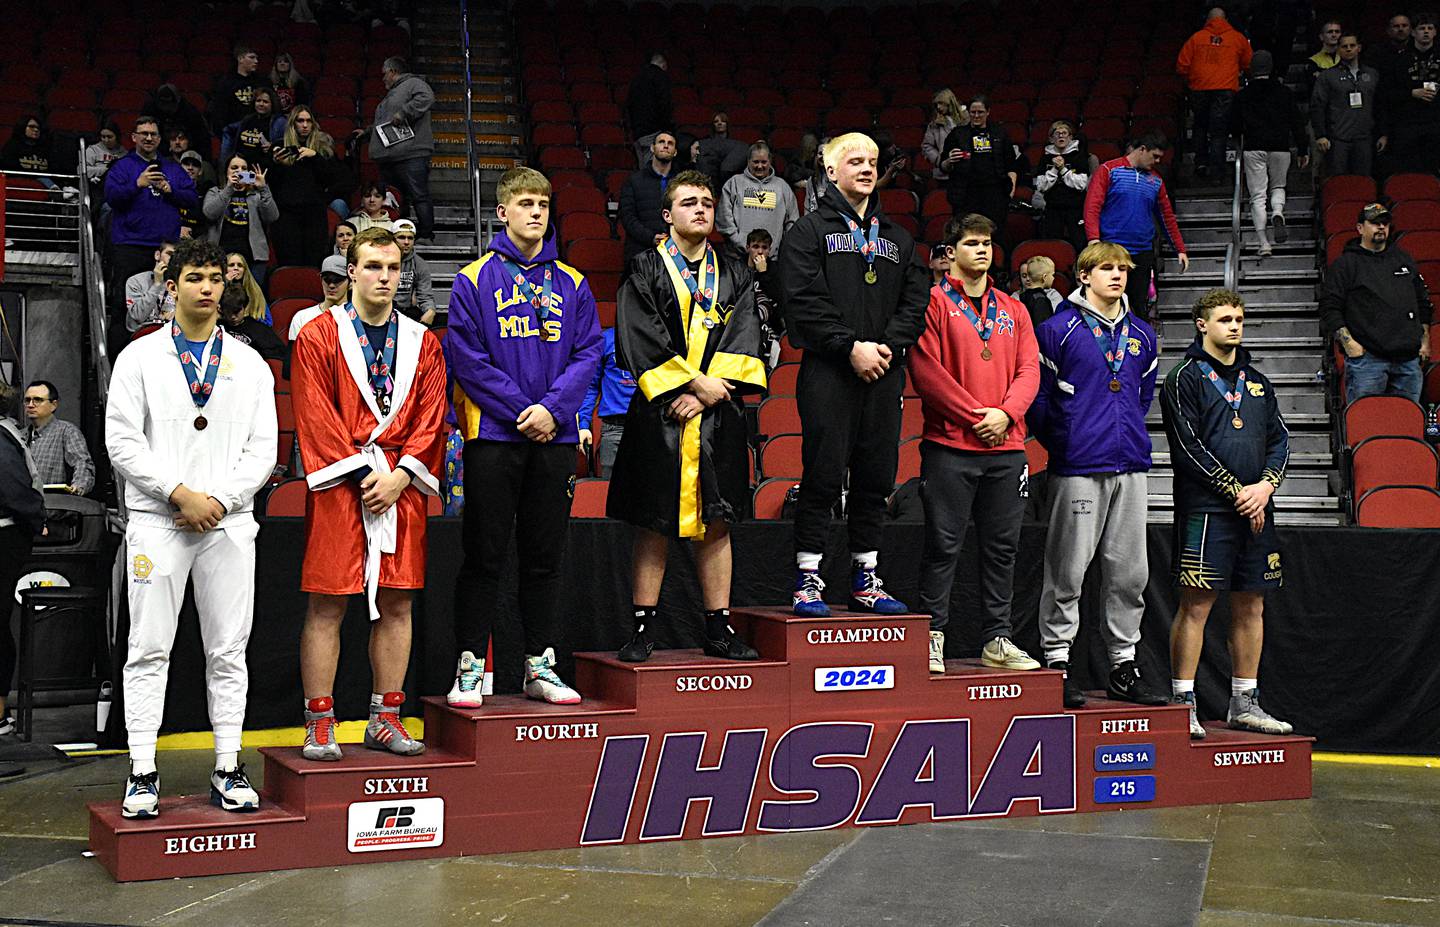 Nodaway Valley/OM's Ashton Honnold stands on top of the medal stand with seven other medalists at 215 pounds.